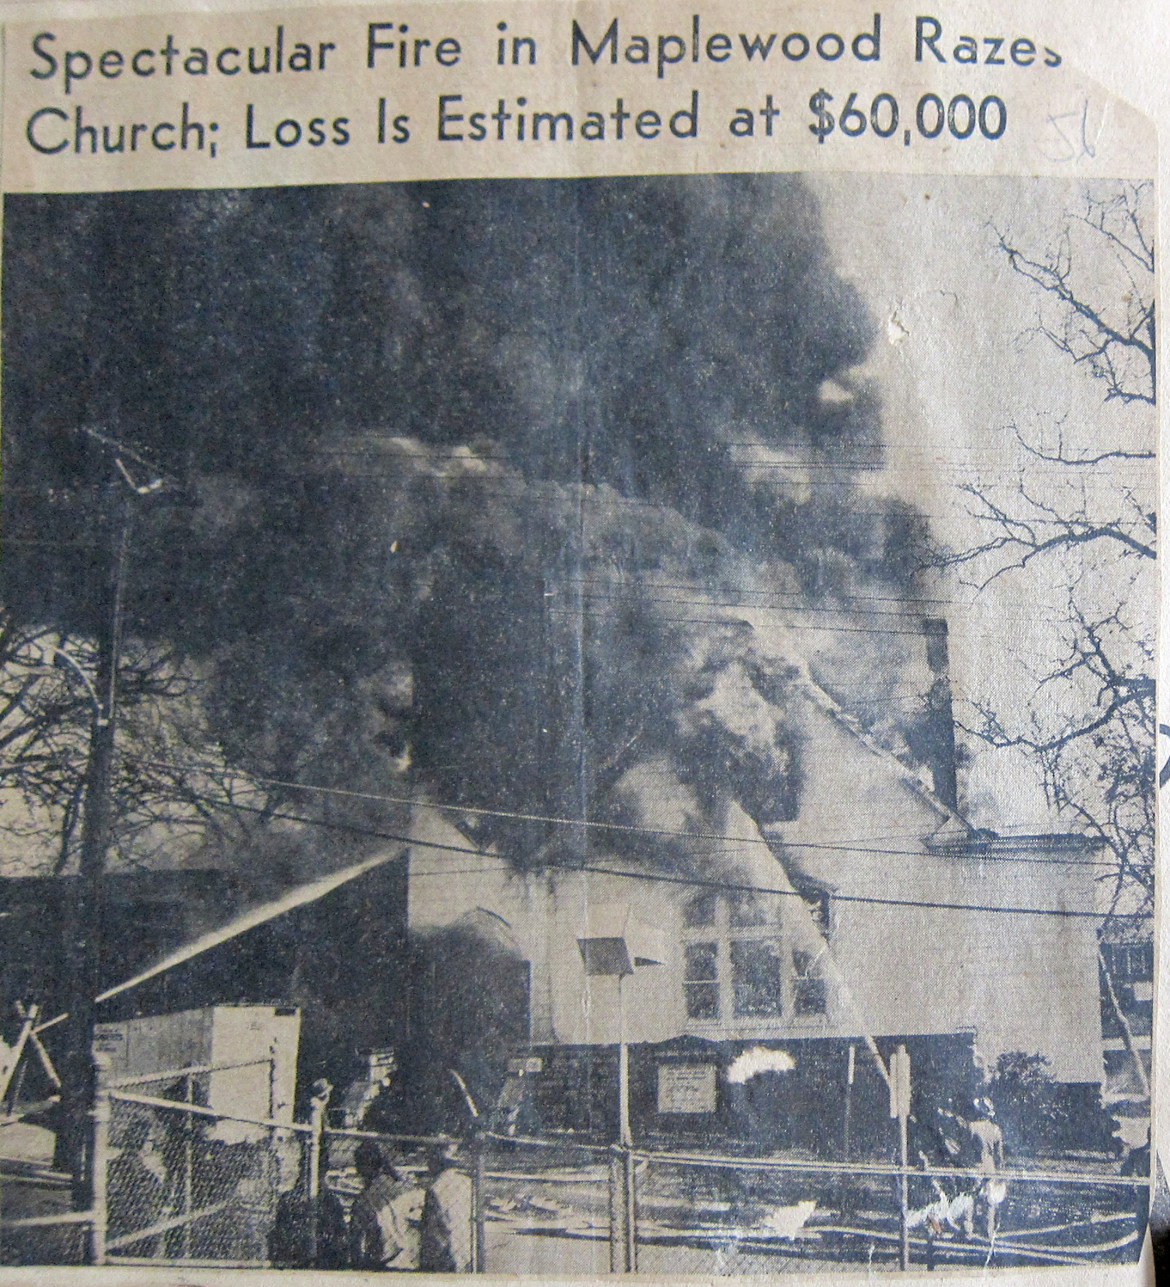 Newspaper clipping from a 1954 Maplewood Observer. Courtesy of the Maplewood Public Library.